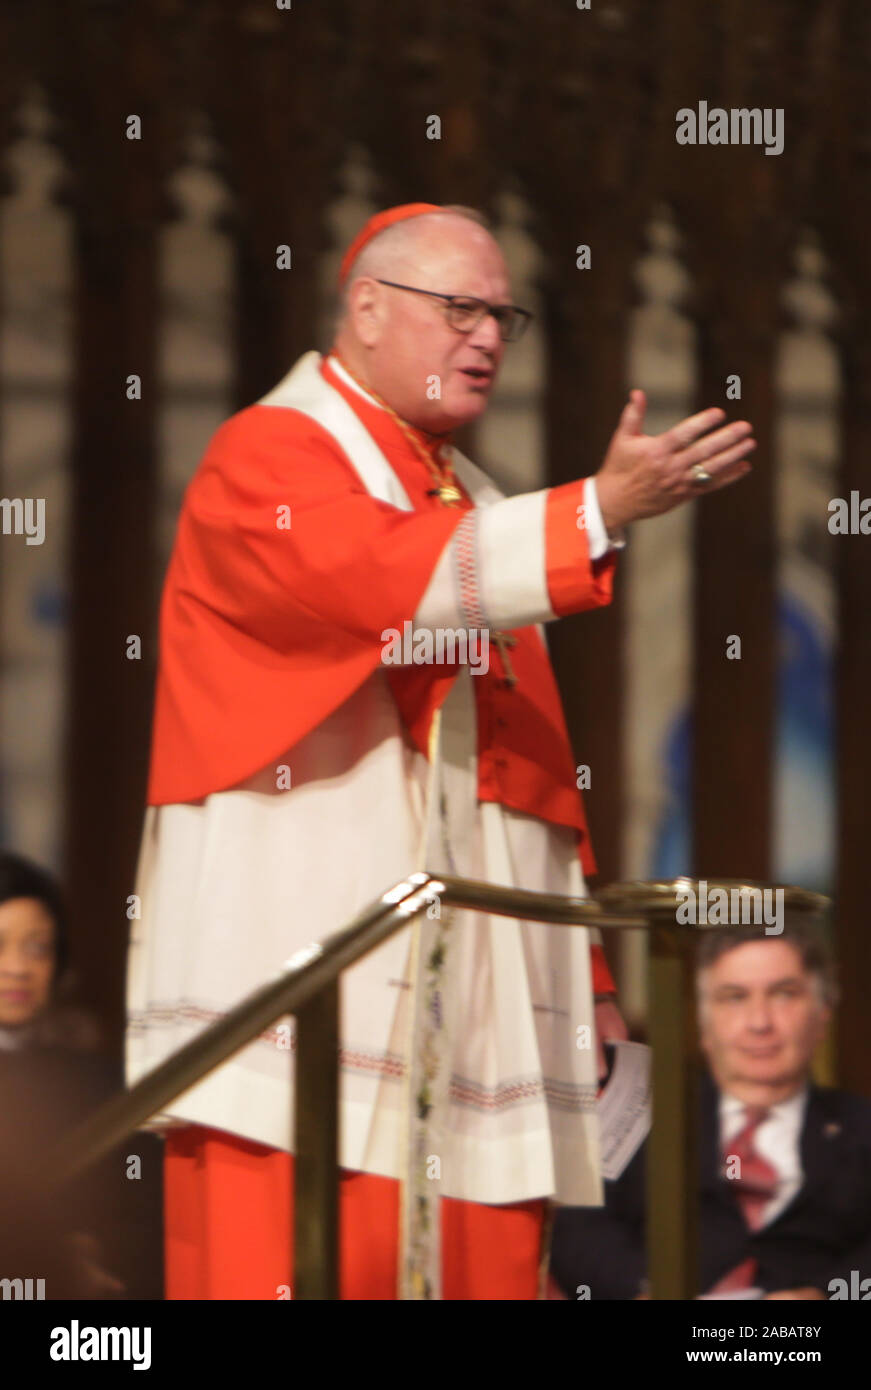 New York, NY, USA. 26th Nov, 2019. New York City Mayor Bill De Blasio along with Arch Bishop of New York Cardinal Timothy Michael Dolan and other religious leaders deliver remarks during the Thanksgiving Prayer Service for Remembrance and Recommitment at St. Patrick's Cathedral on November 26, 2019 in New York City. Credit: Mpi43/Media Punch/Alamy Live News Stock Photo